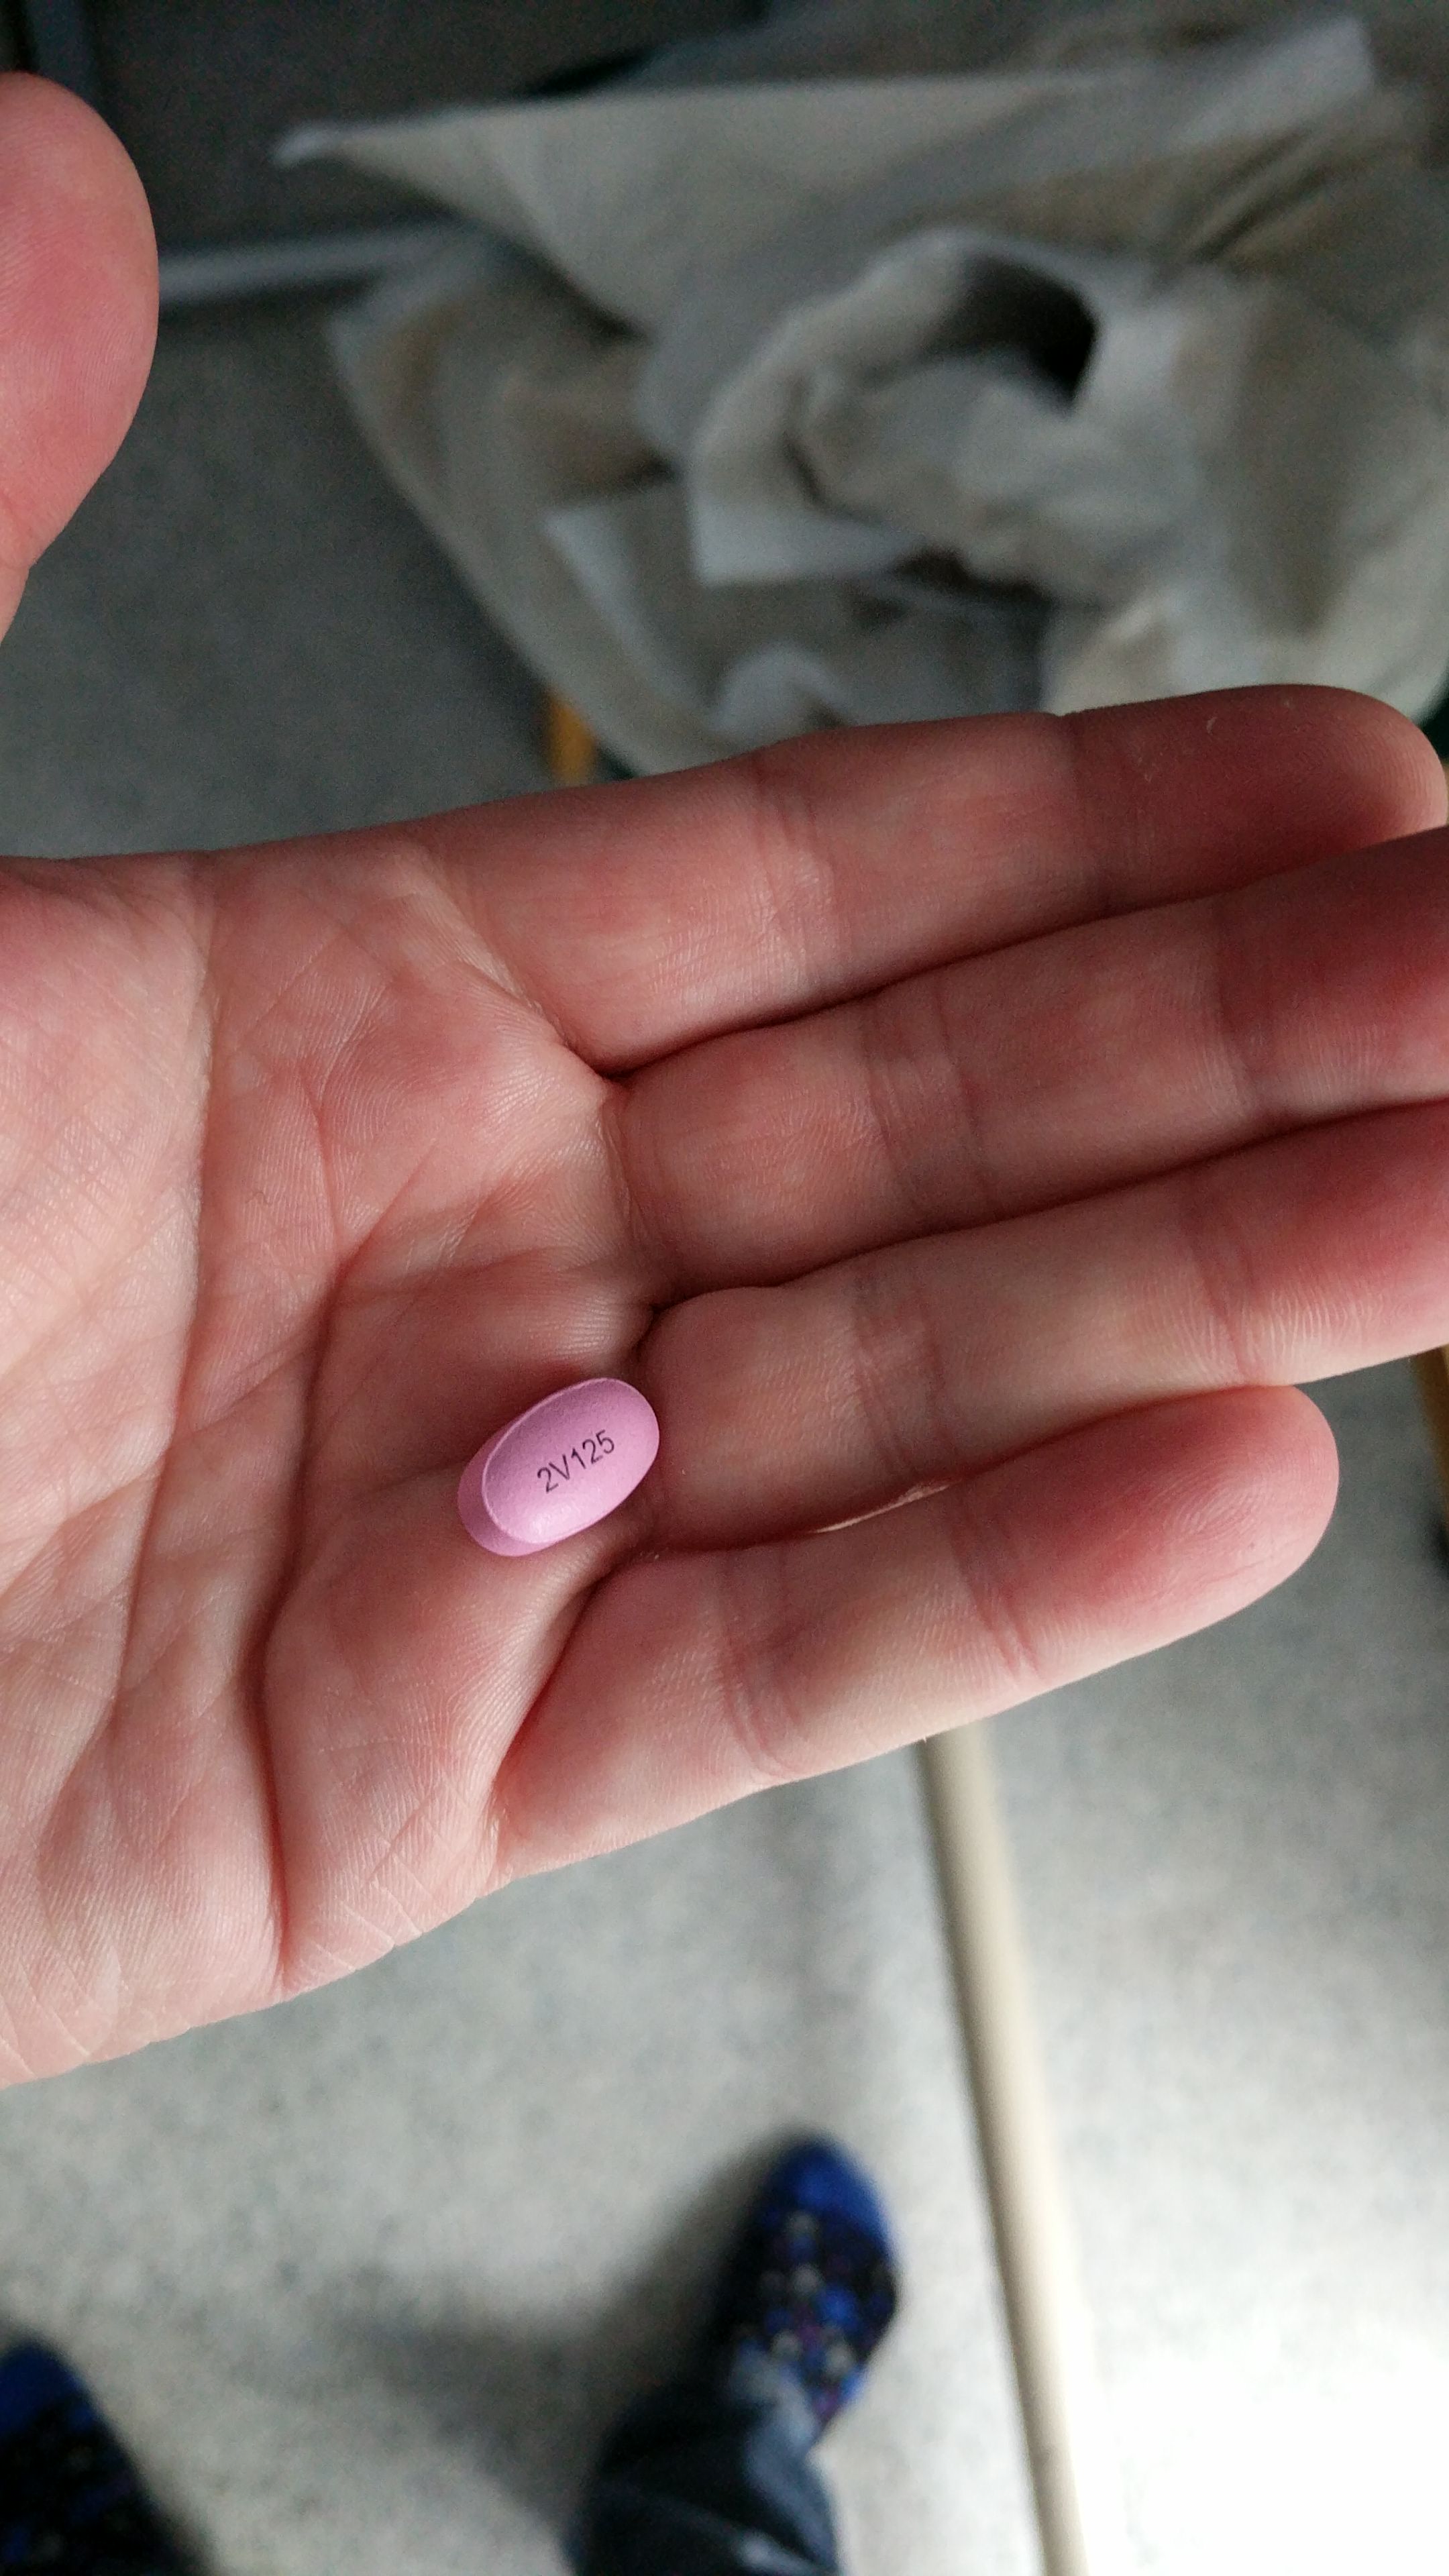 First Orkambi dose, 19-07-2017 at 10 AM